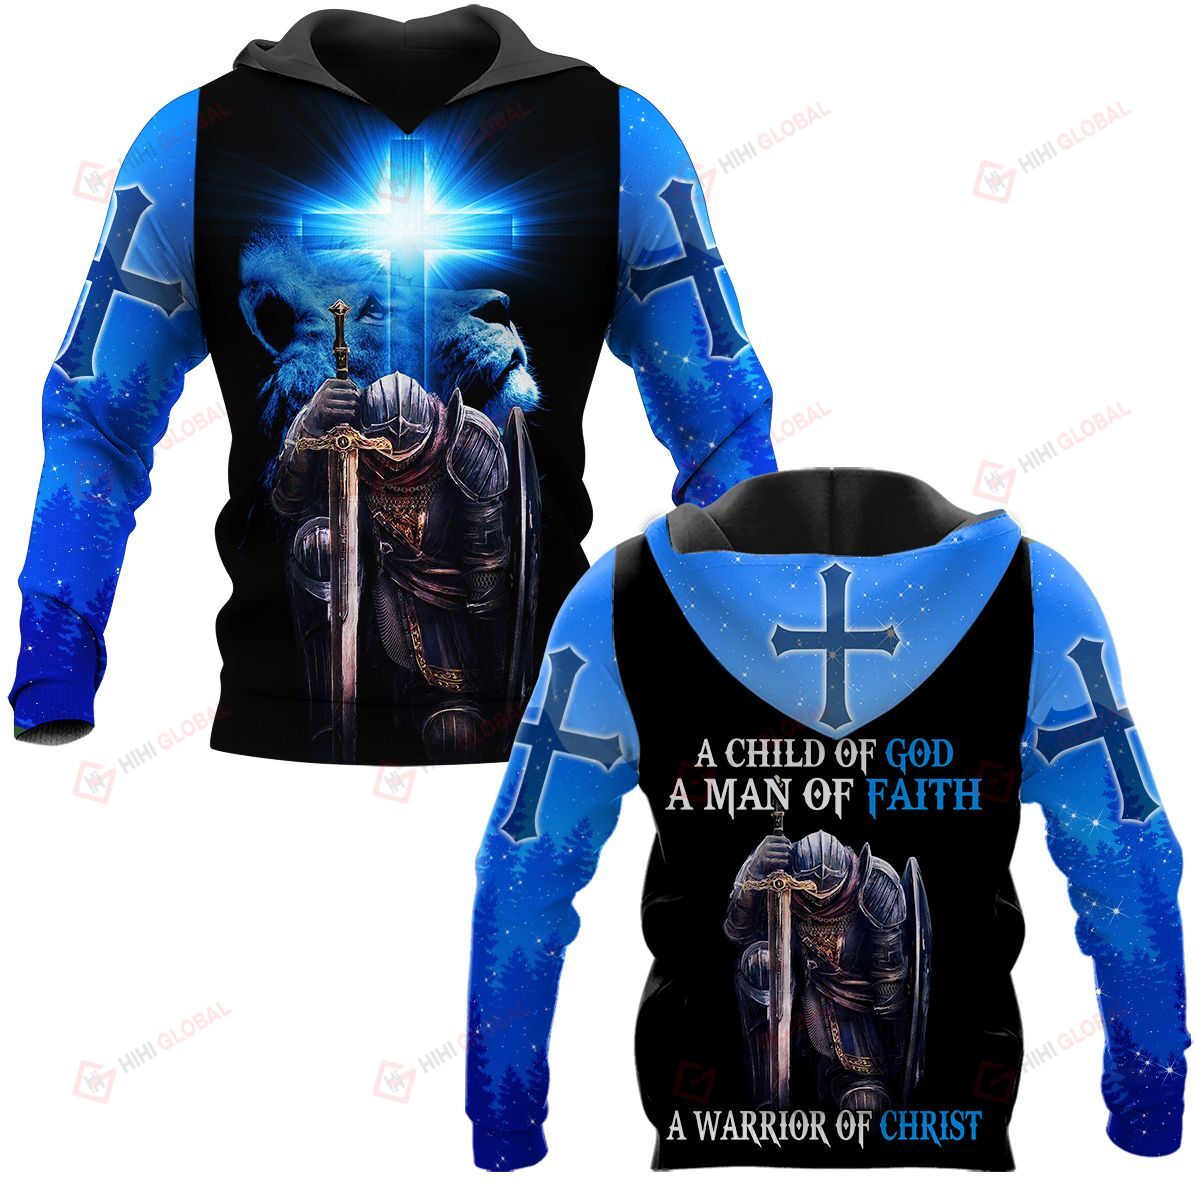 A CHILD OF GOD A MAN OF FAITH A WARRIOR OF CHRIST HOODIE 3D